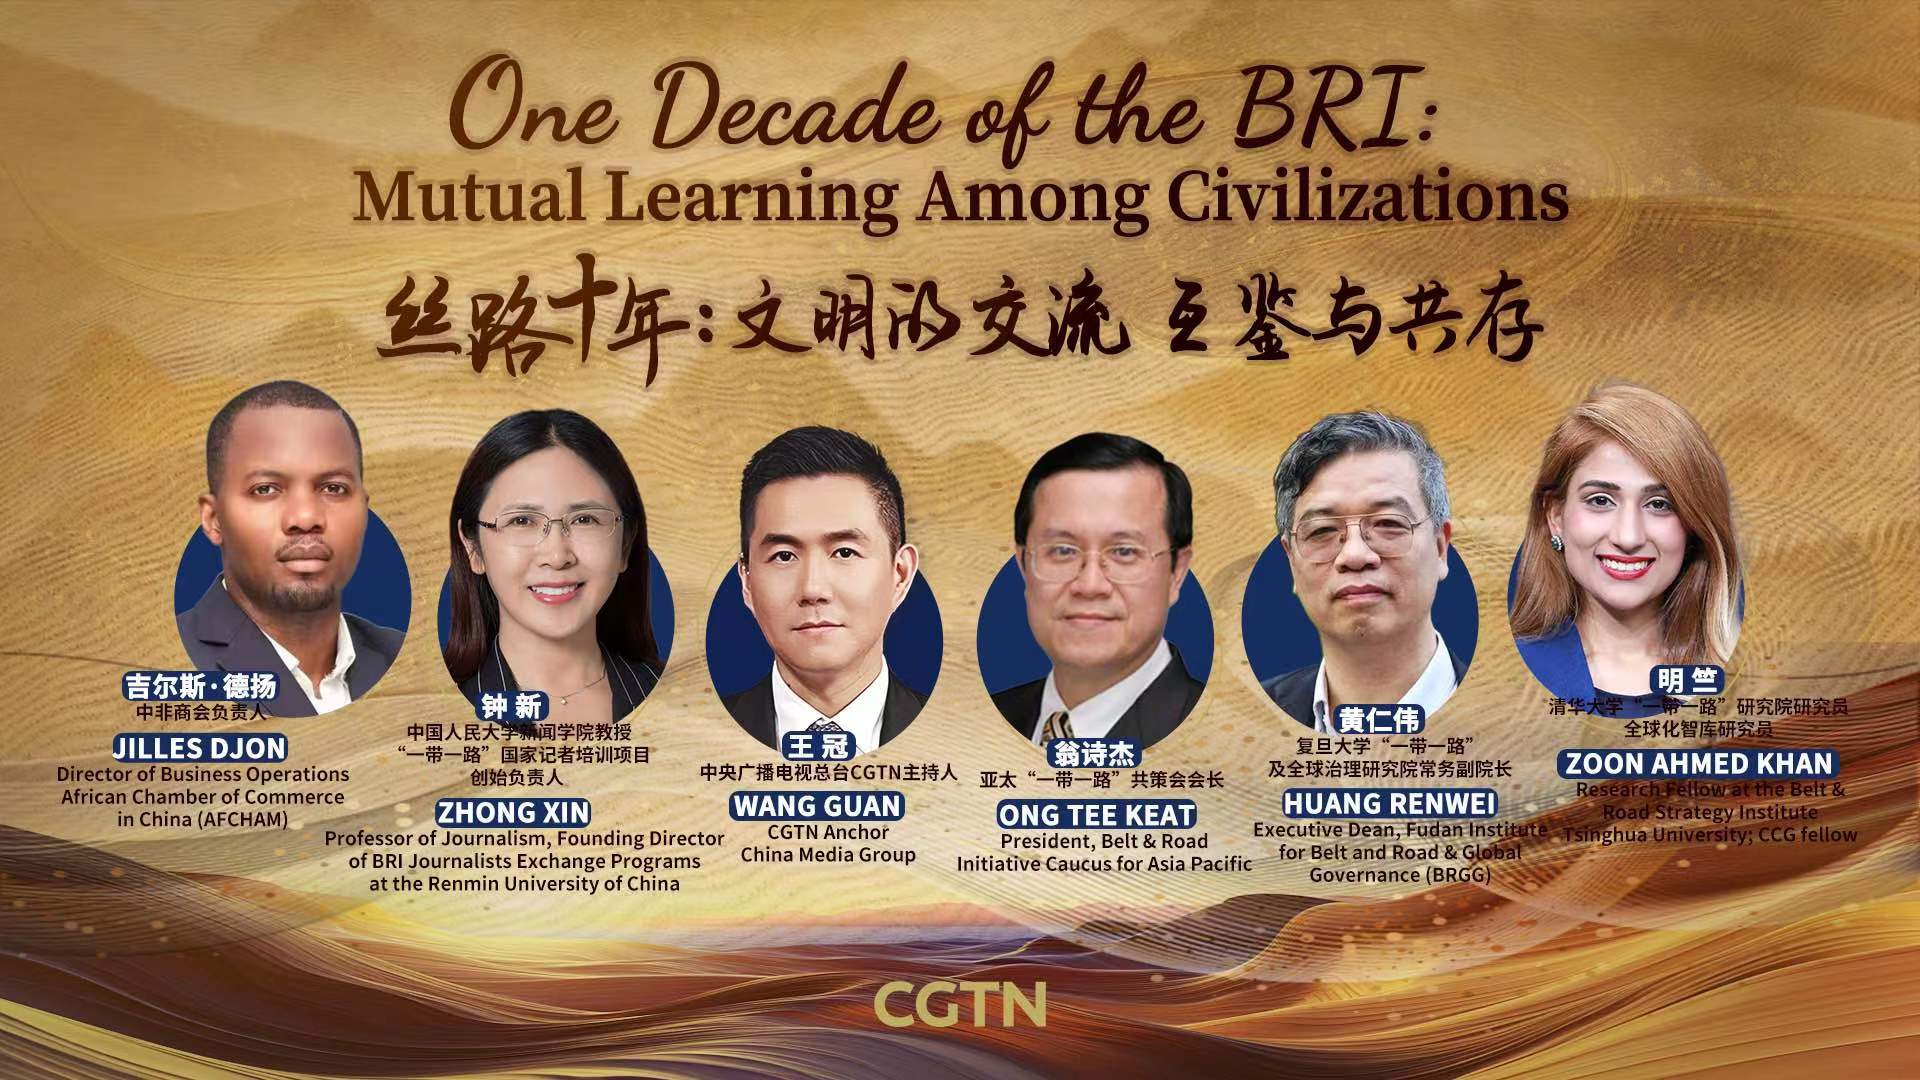 Live: One decade of the BRI: Mutual learning among civilizations